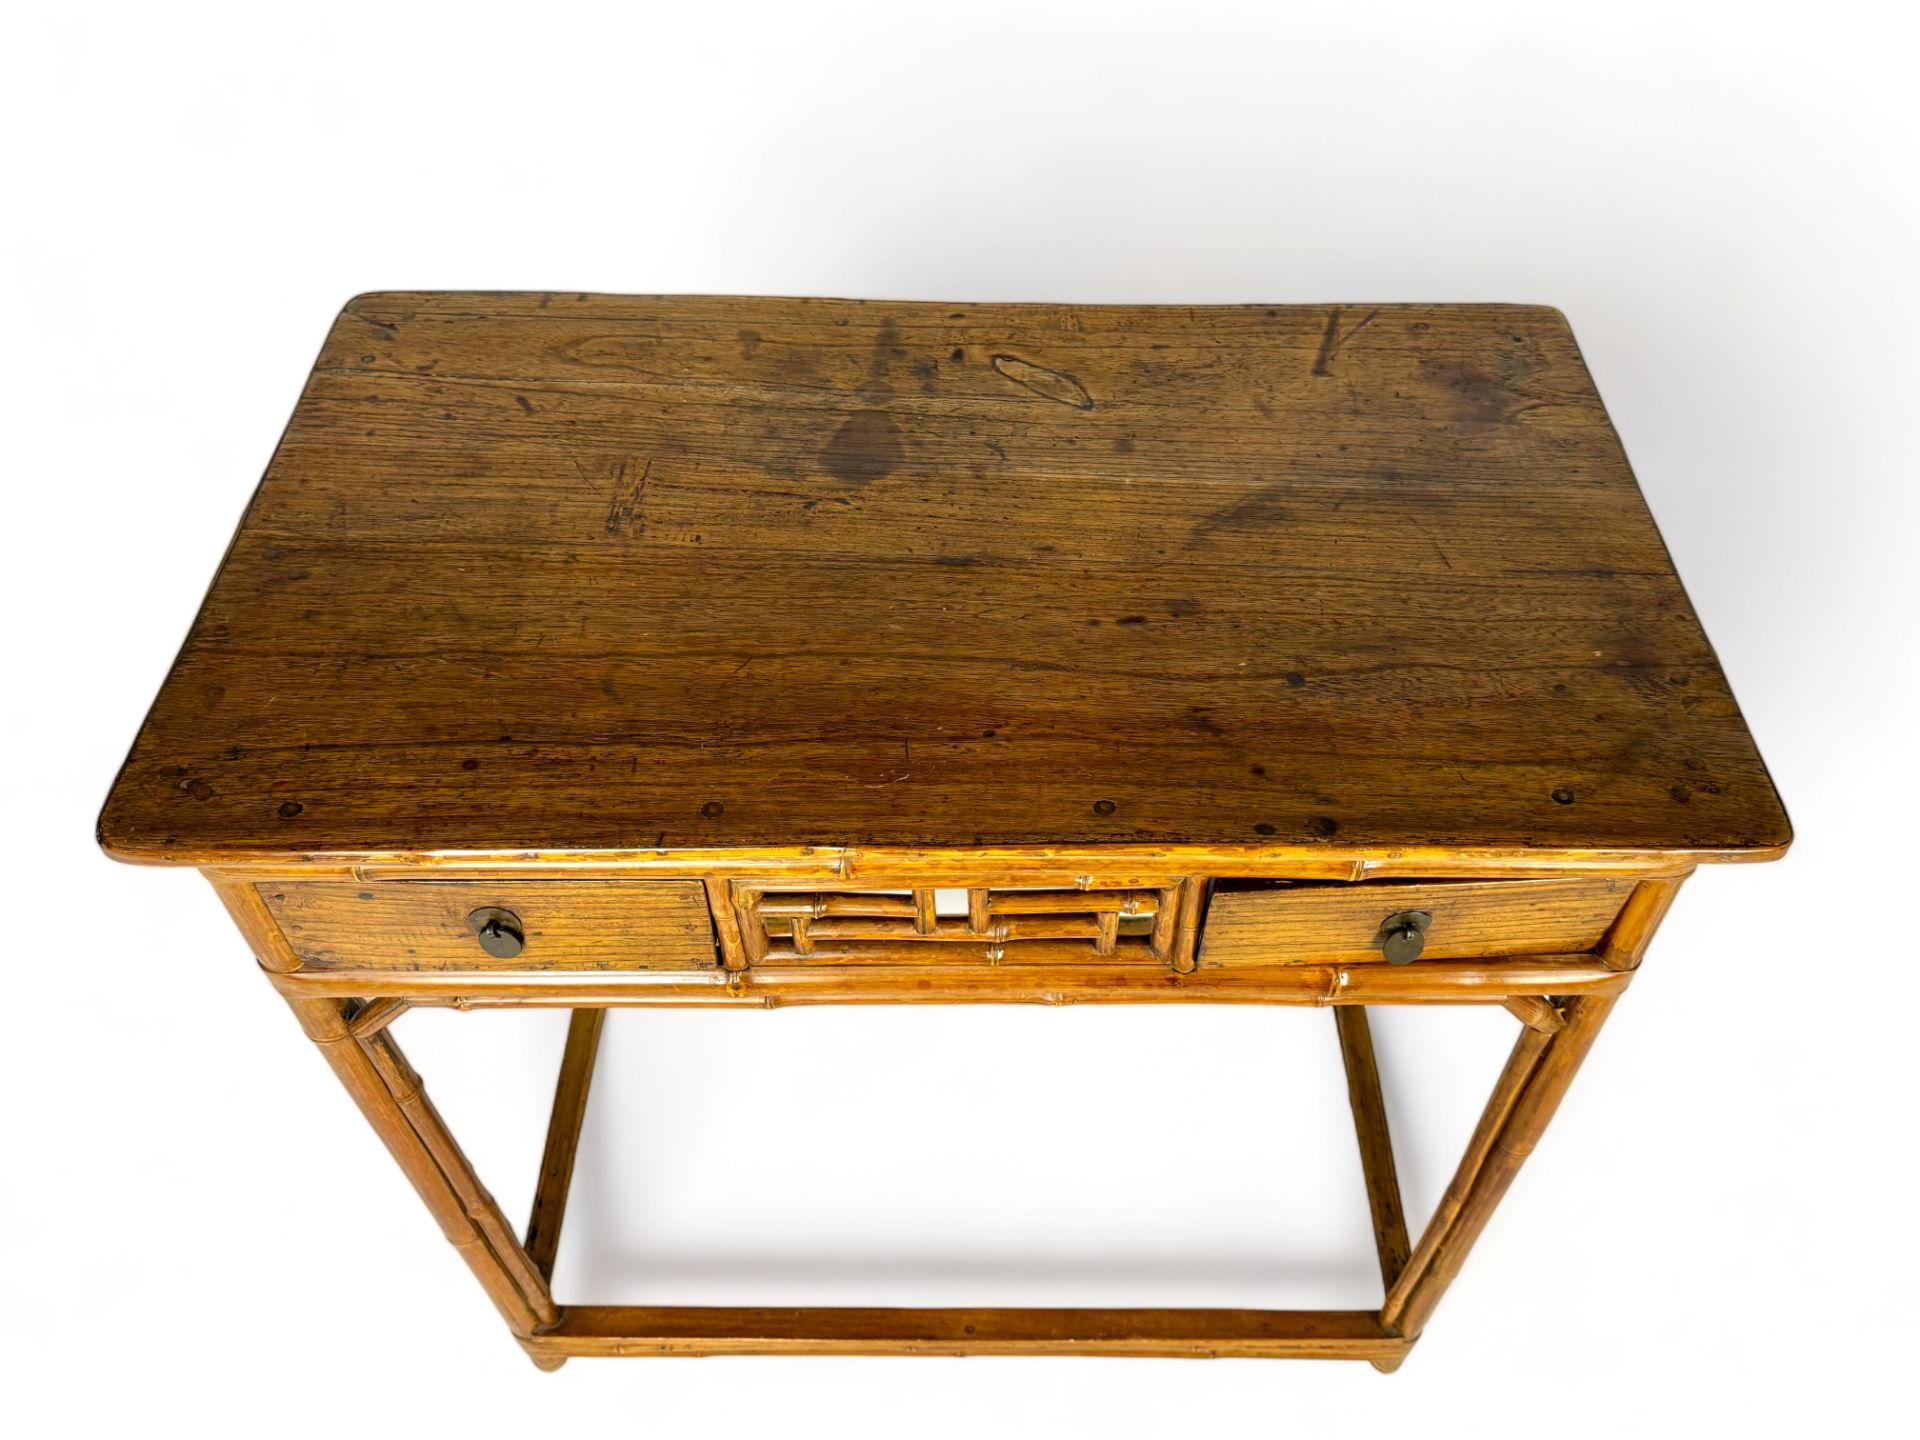 A 19th century Chinese elm and bamboo table - Image 6 of 6